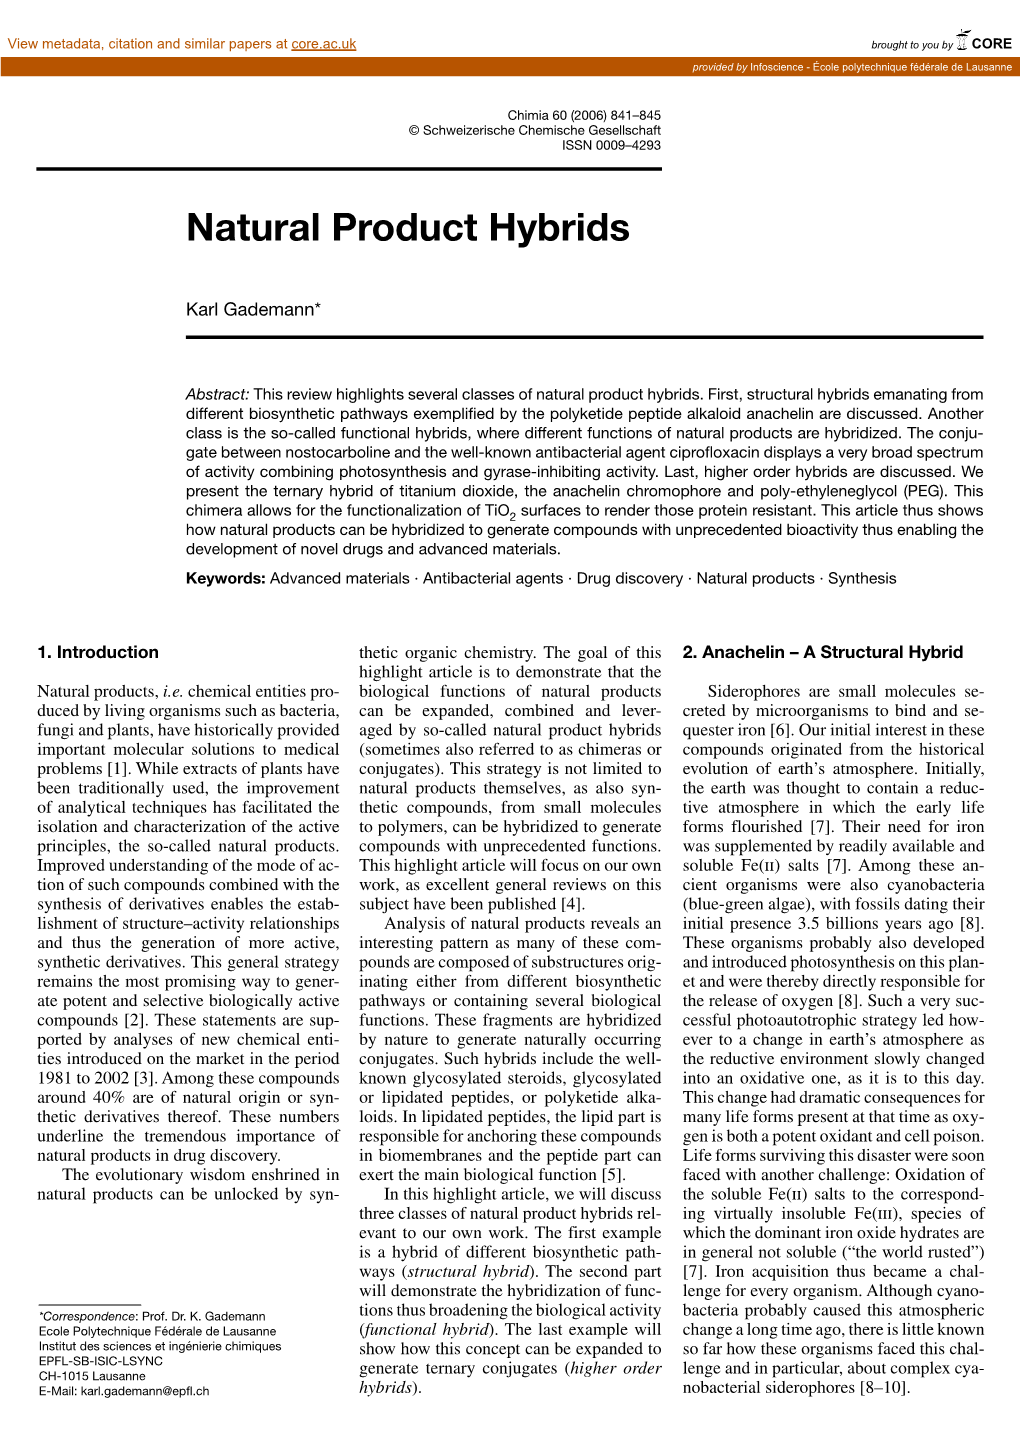 Natural Product Hybrids